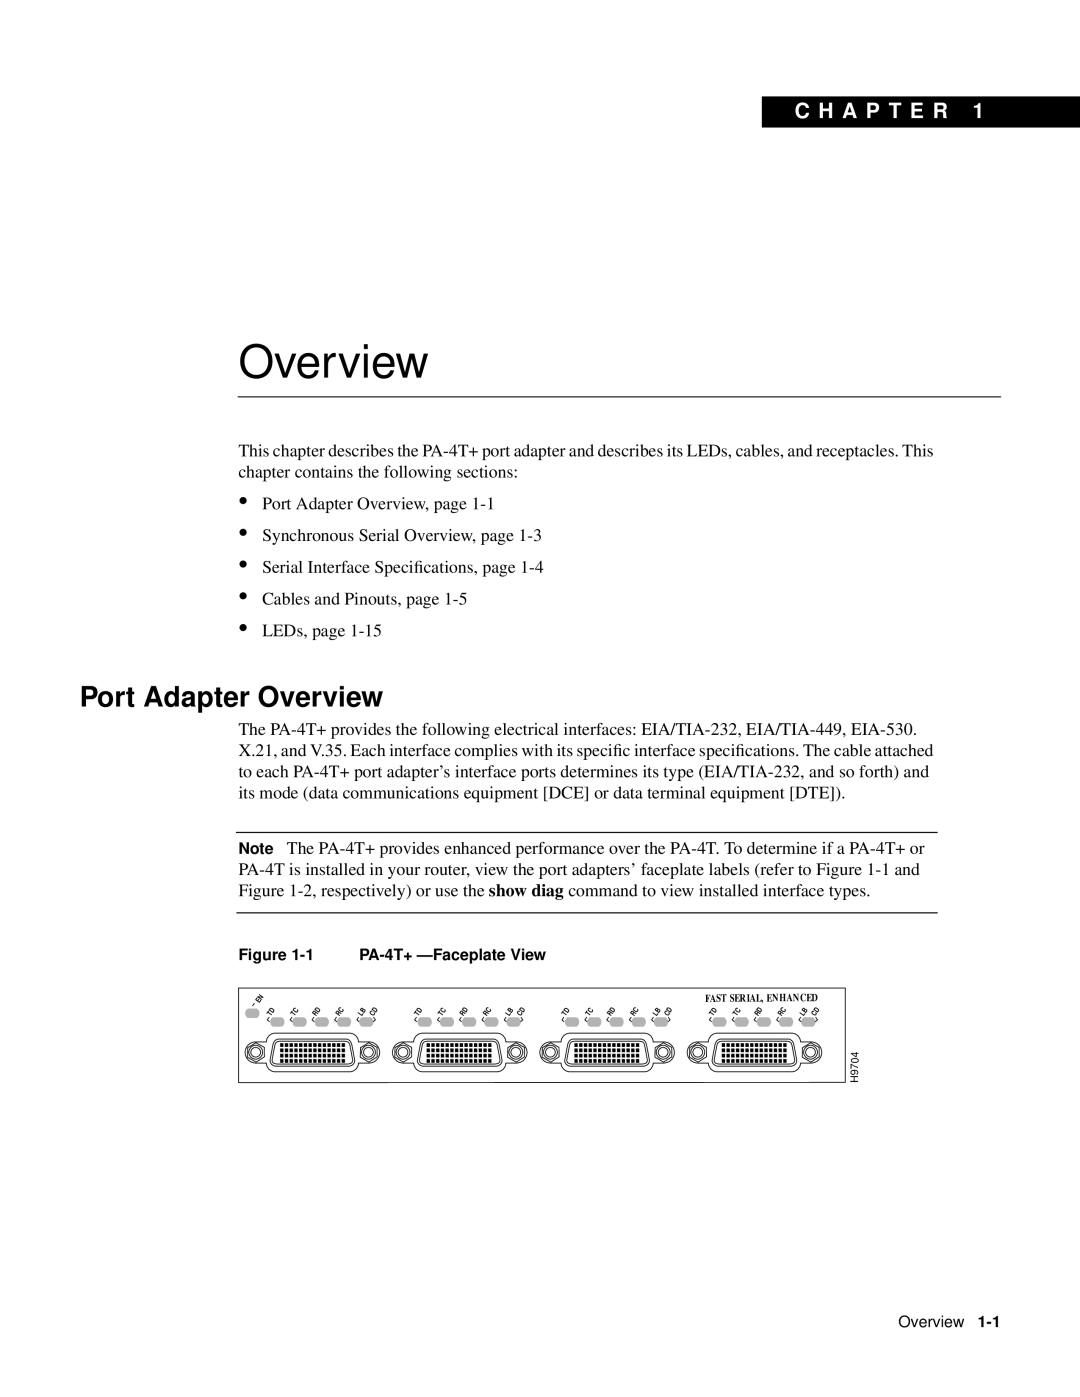 Cisco Systems PA-4T manual Port Adapter Overview, C H A P T E R 